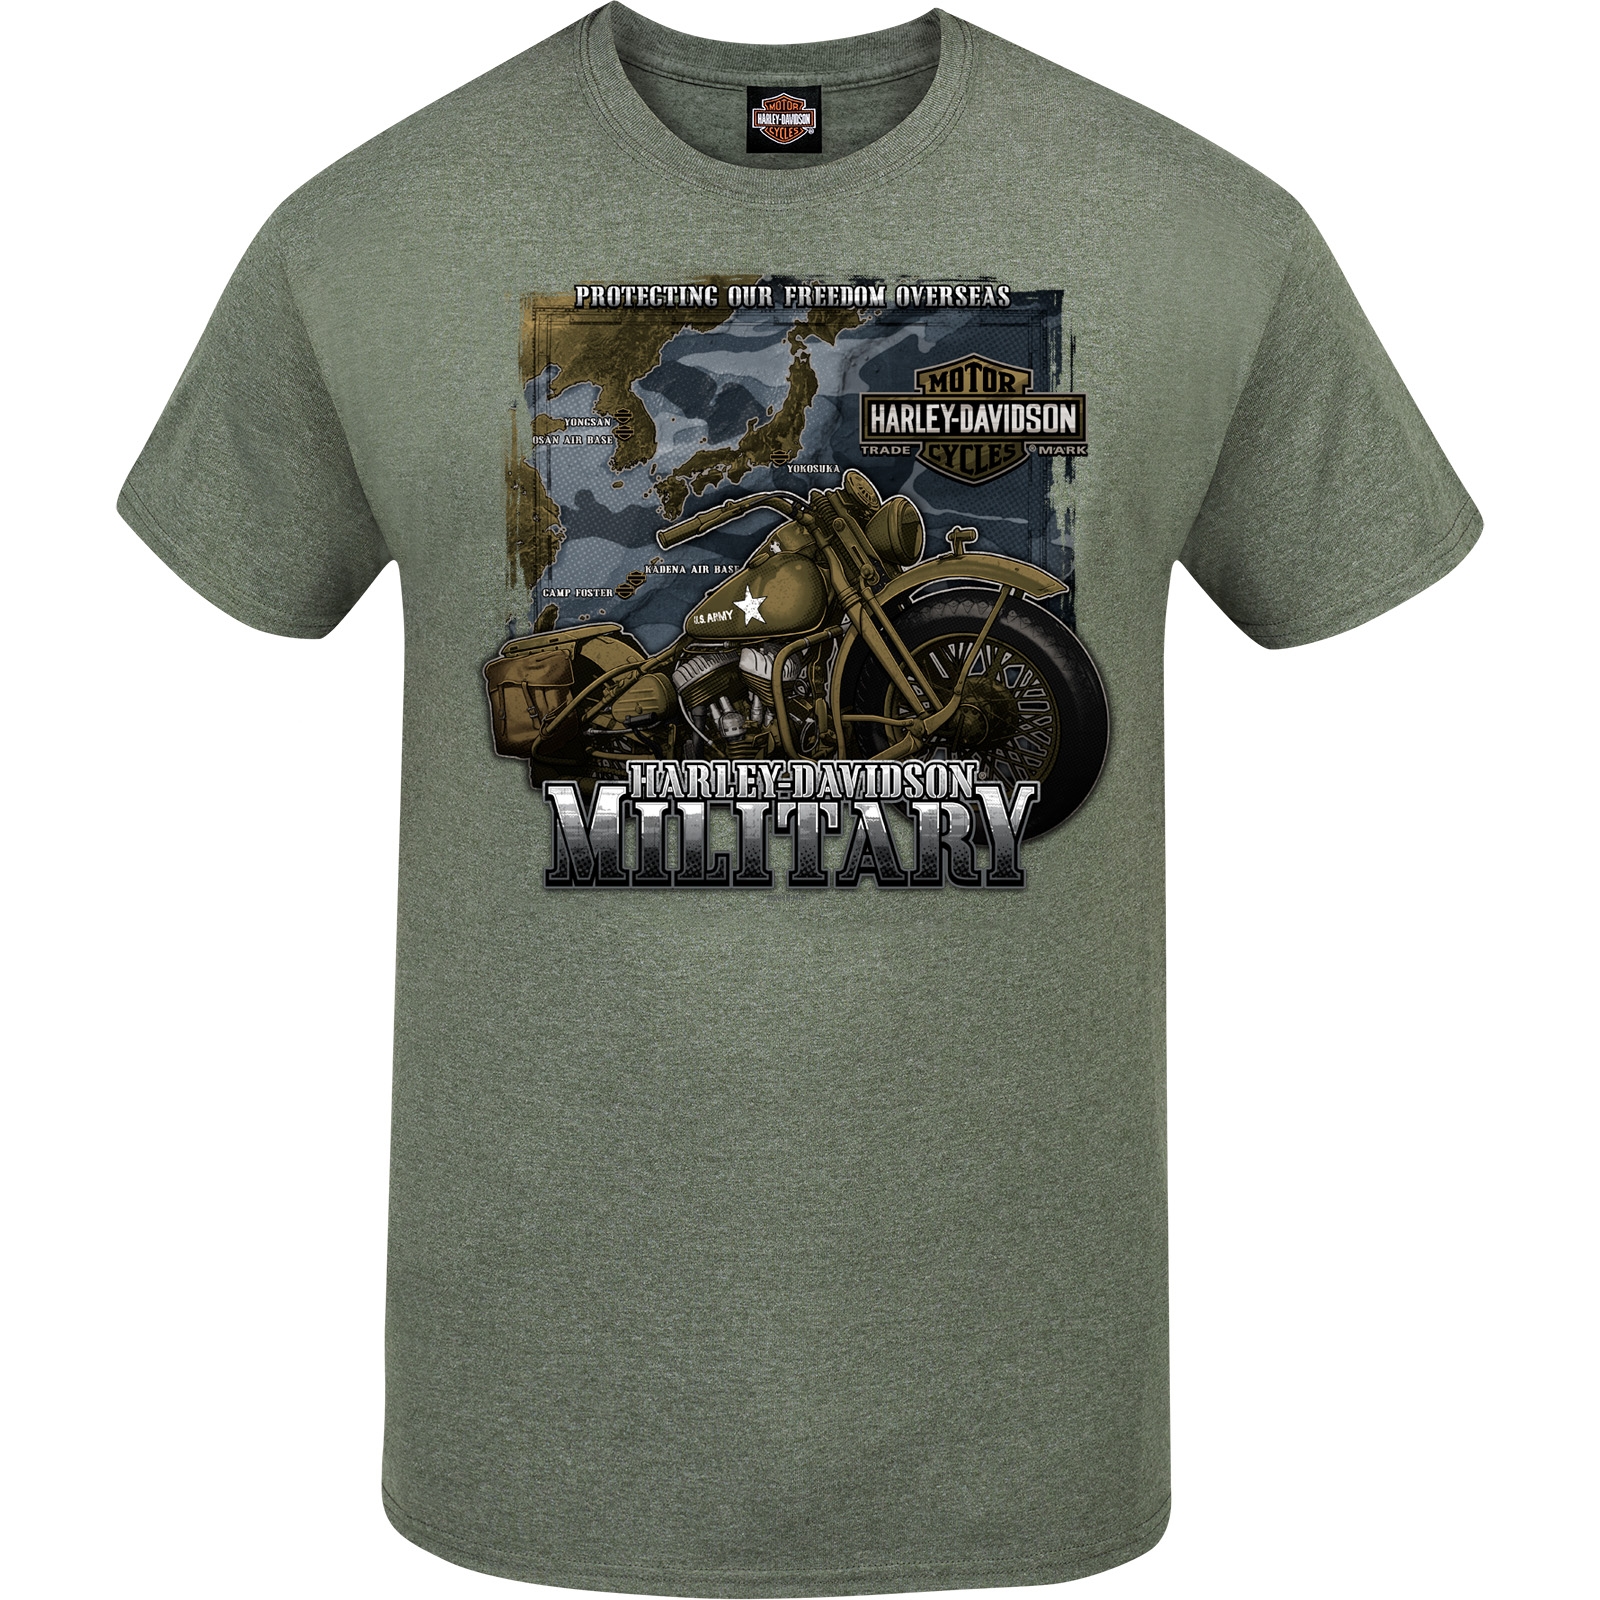 Men's Heather Military Green Graphic T-Shirt - "Tour of Duty Pacific"